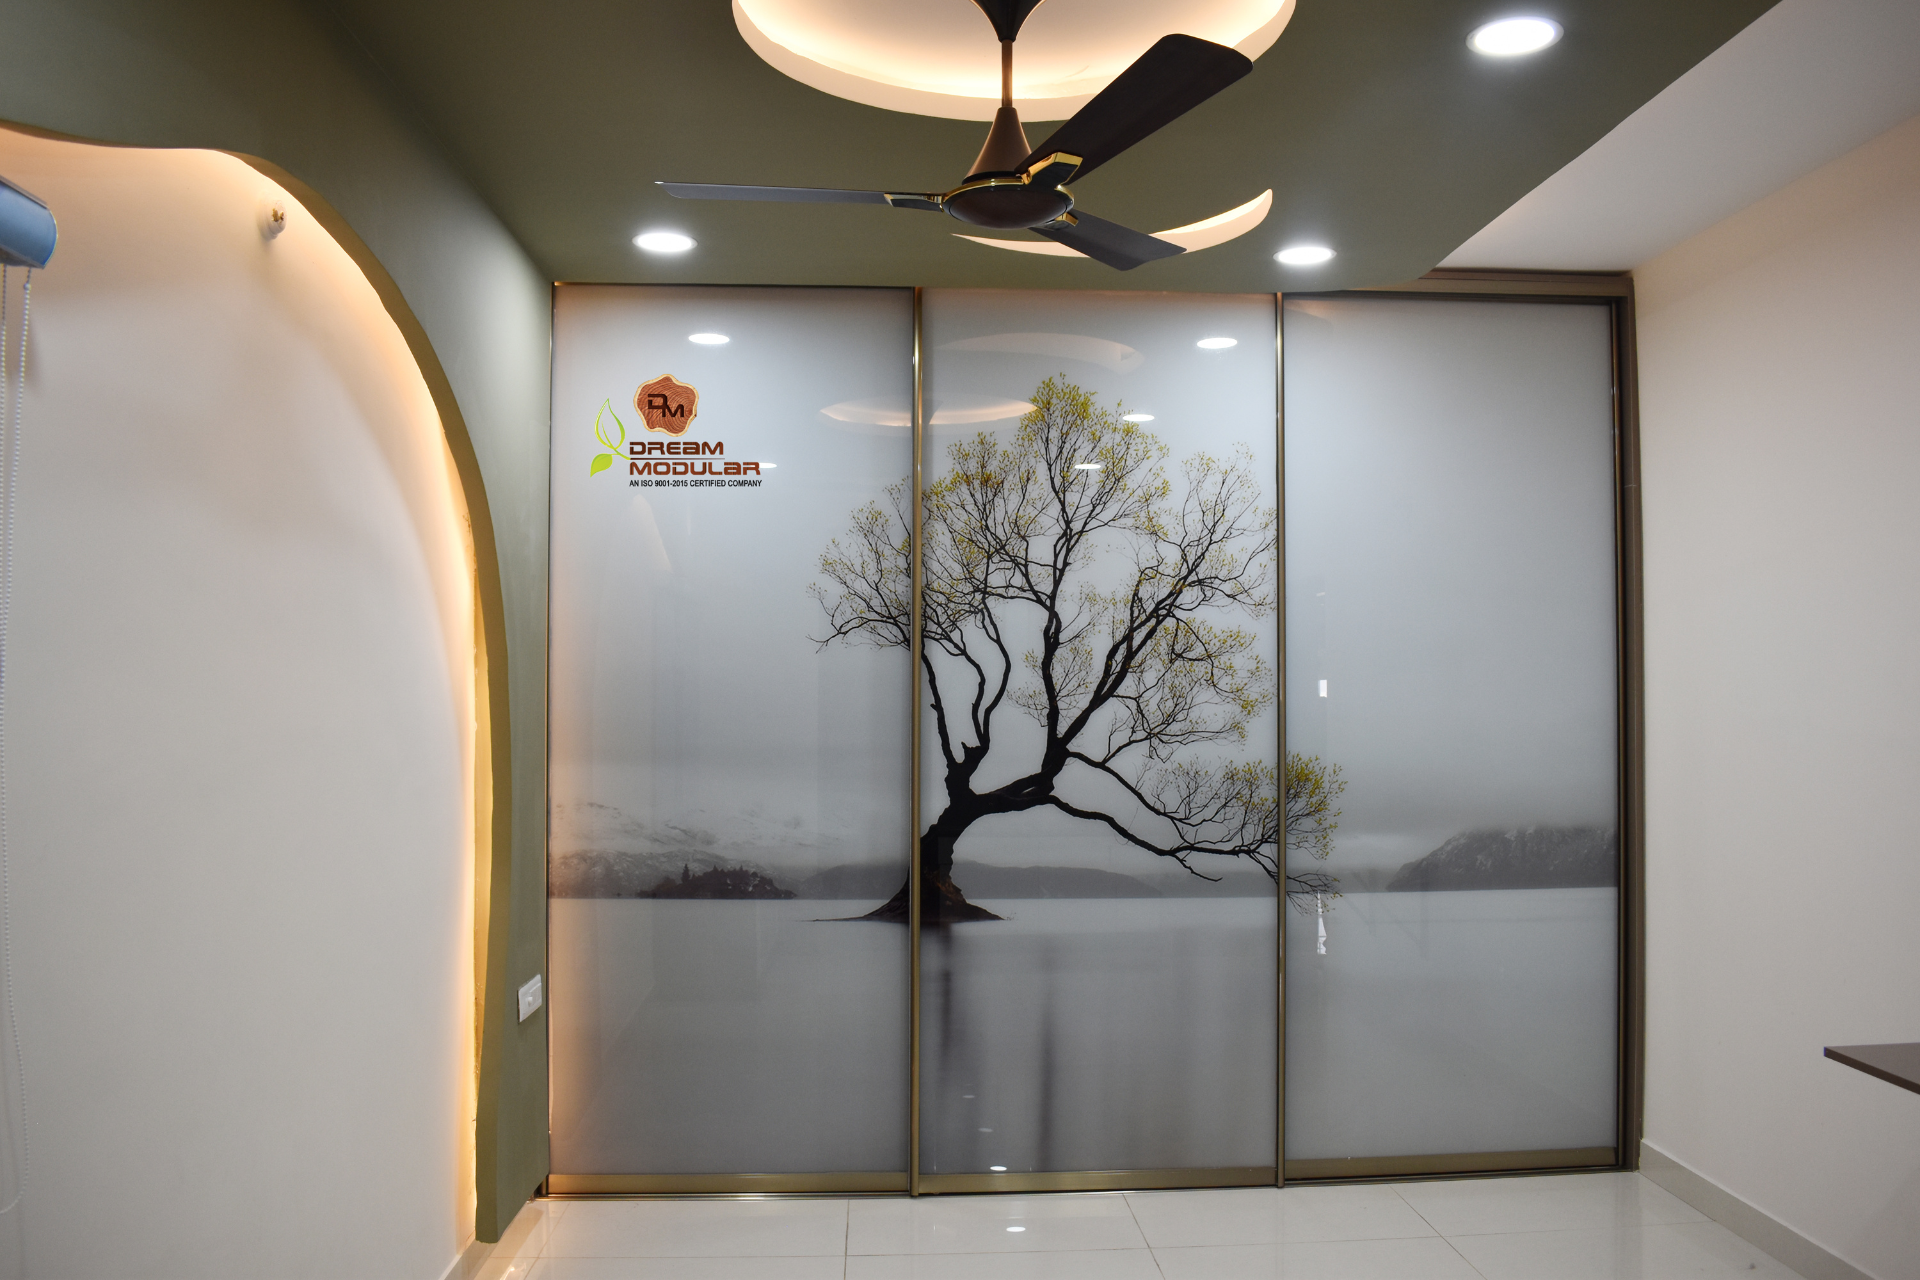 A bedroom with a sliding glass door wardrobe with a coated tree image and modern interior design.